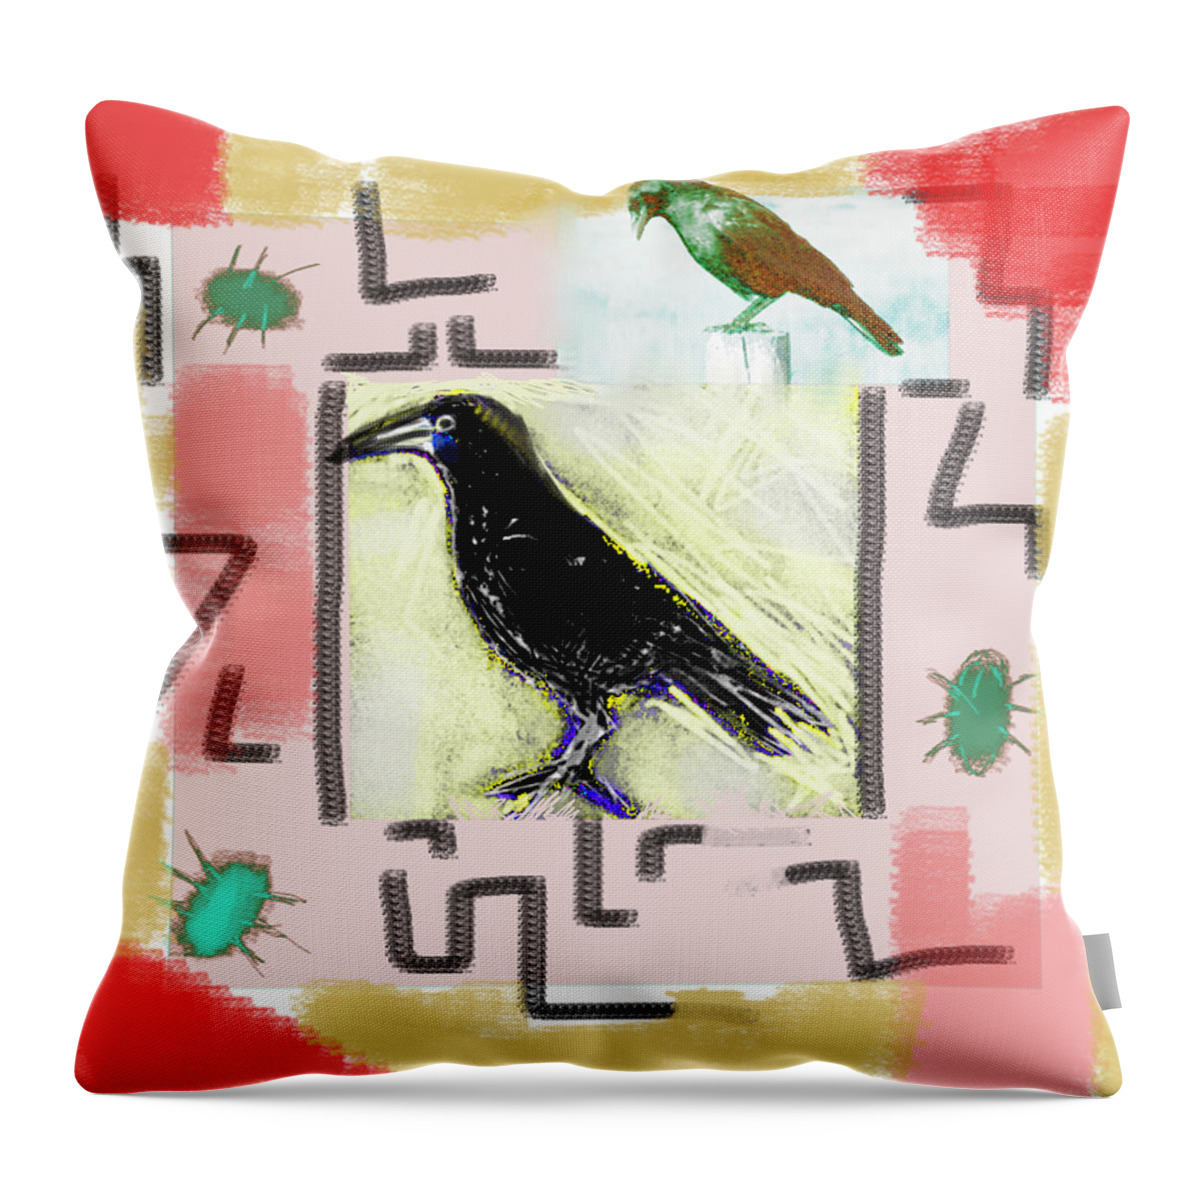 Crow Throw Pillow featuring the painting Interpretation Of The Dream by Paul Sutcliffe